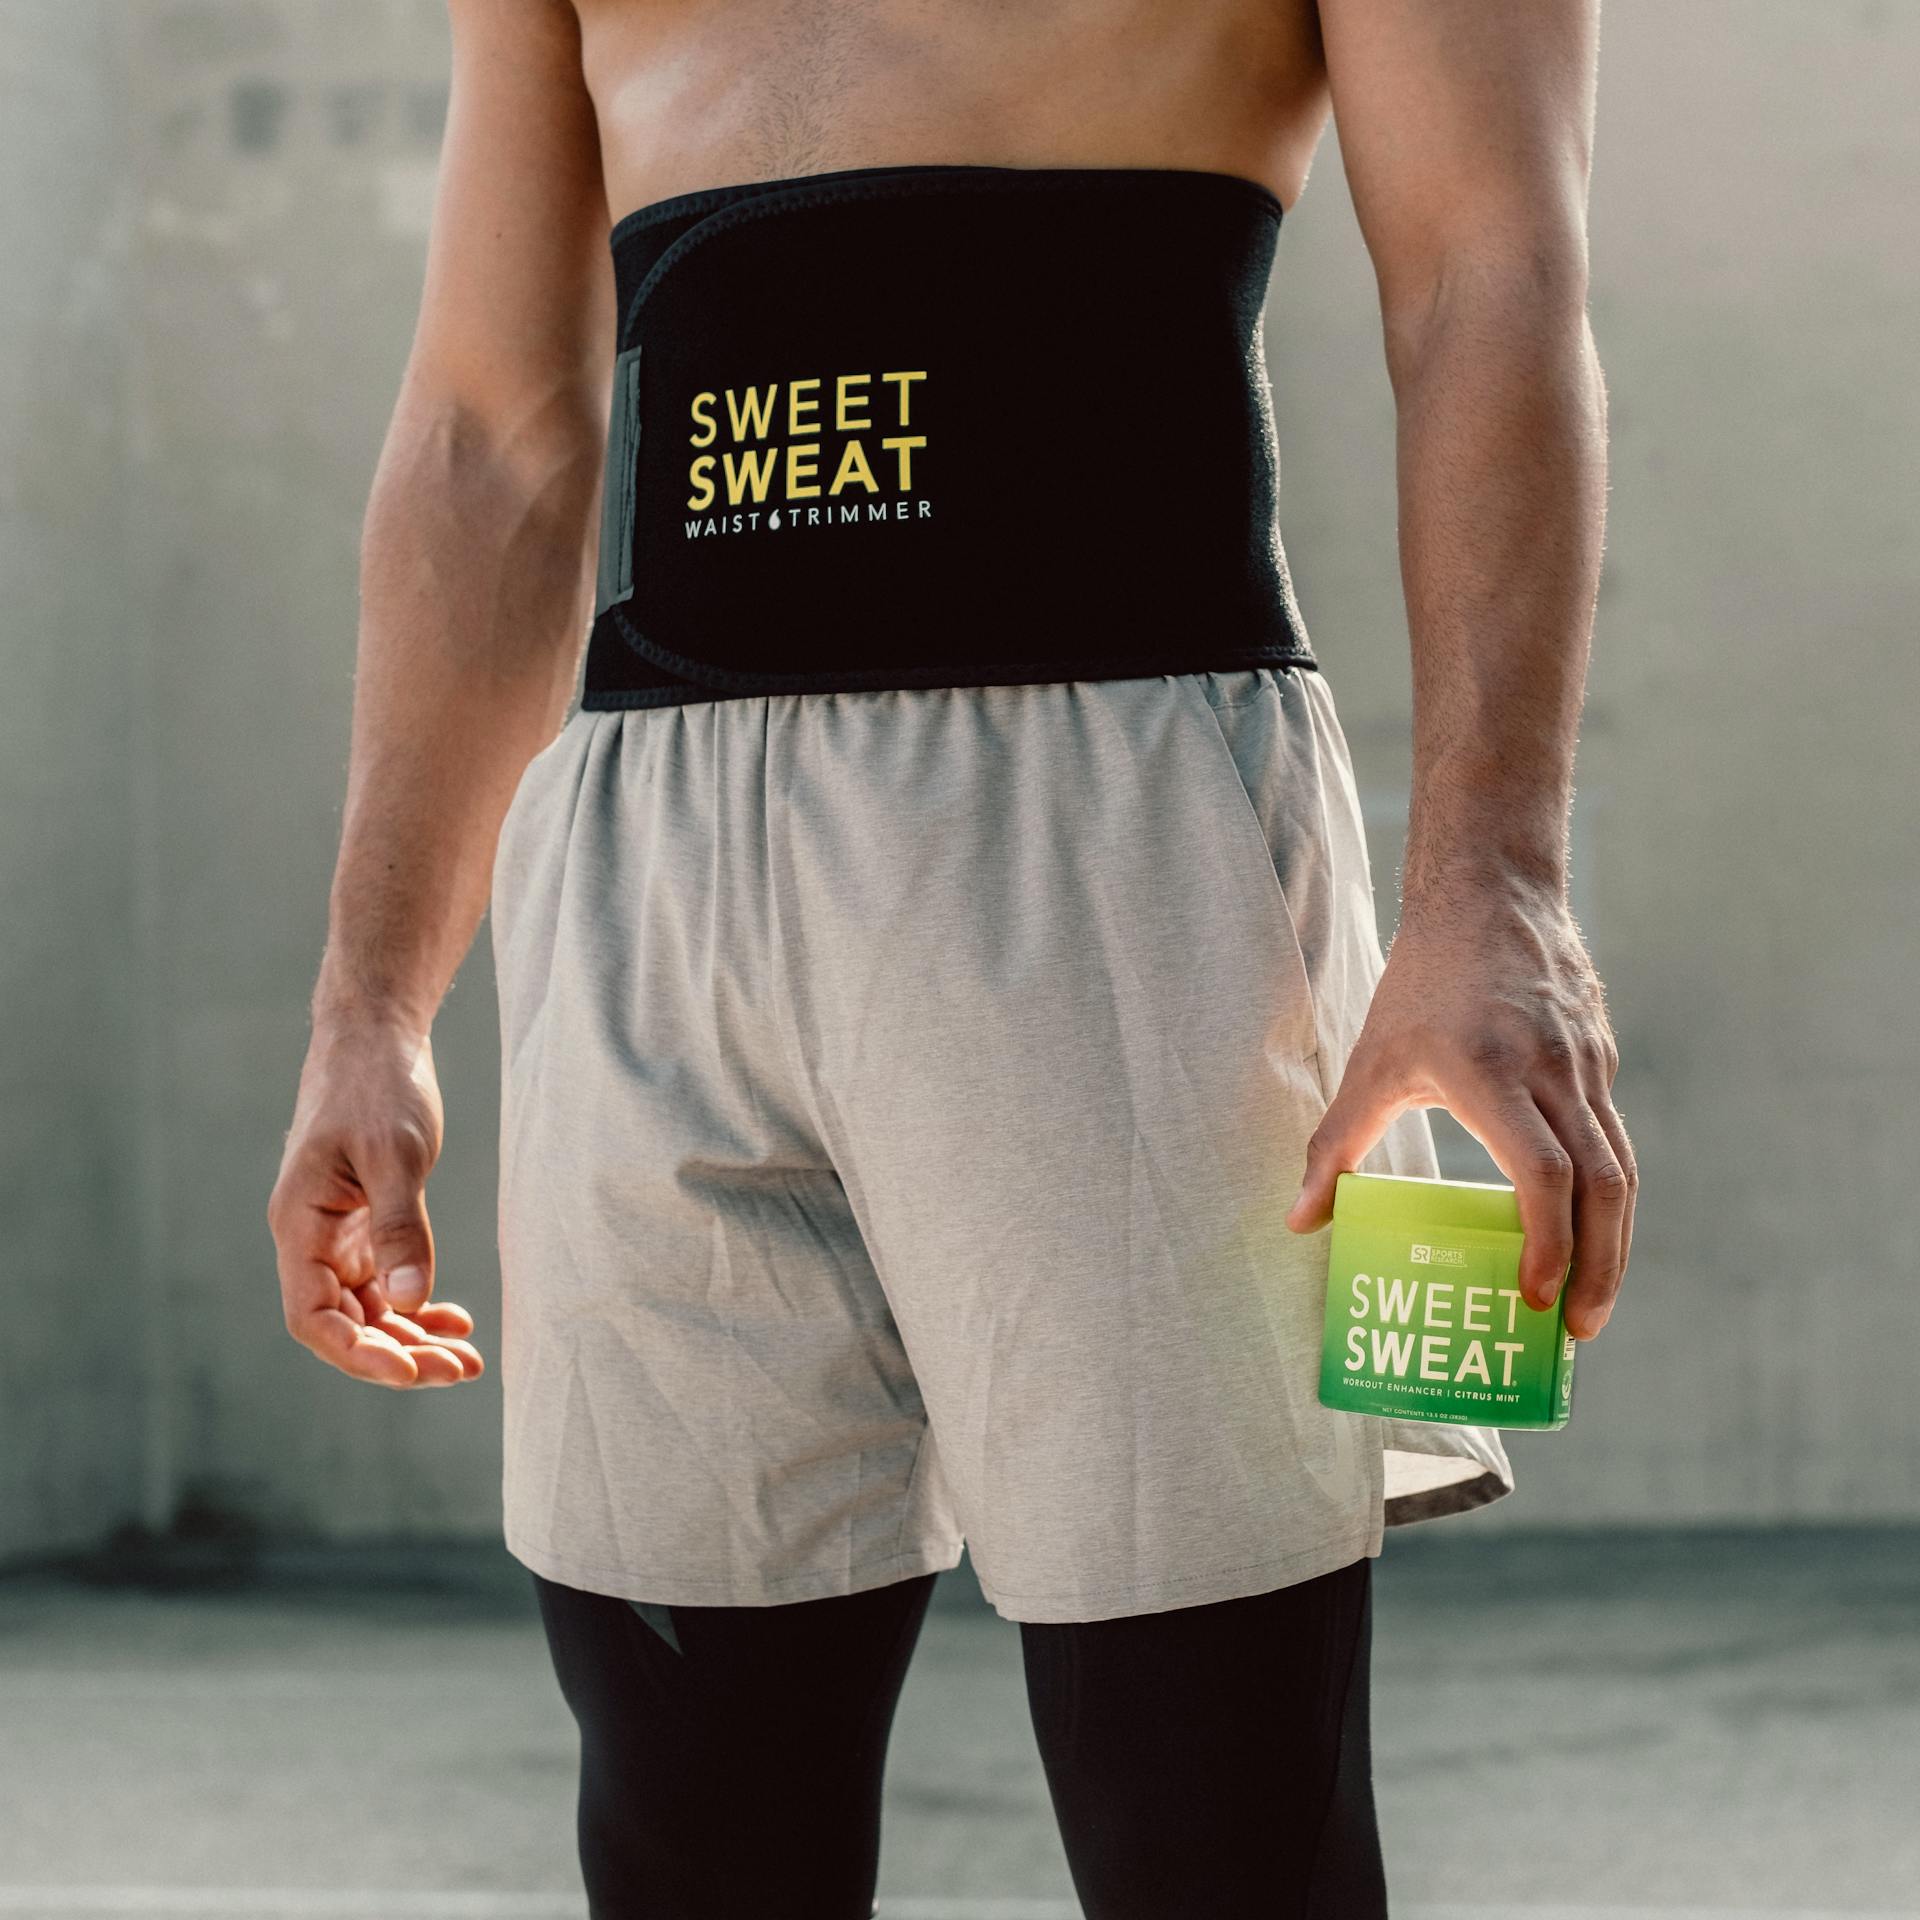 Sports Research Sweet Sweat Waist Trimmer for Women and Men